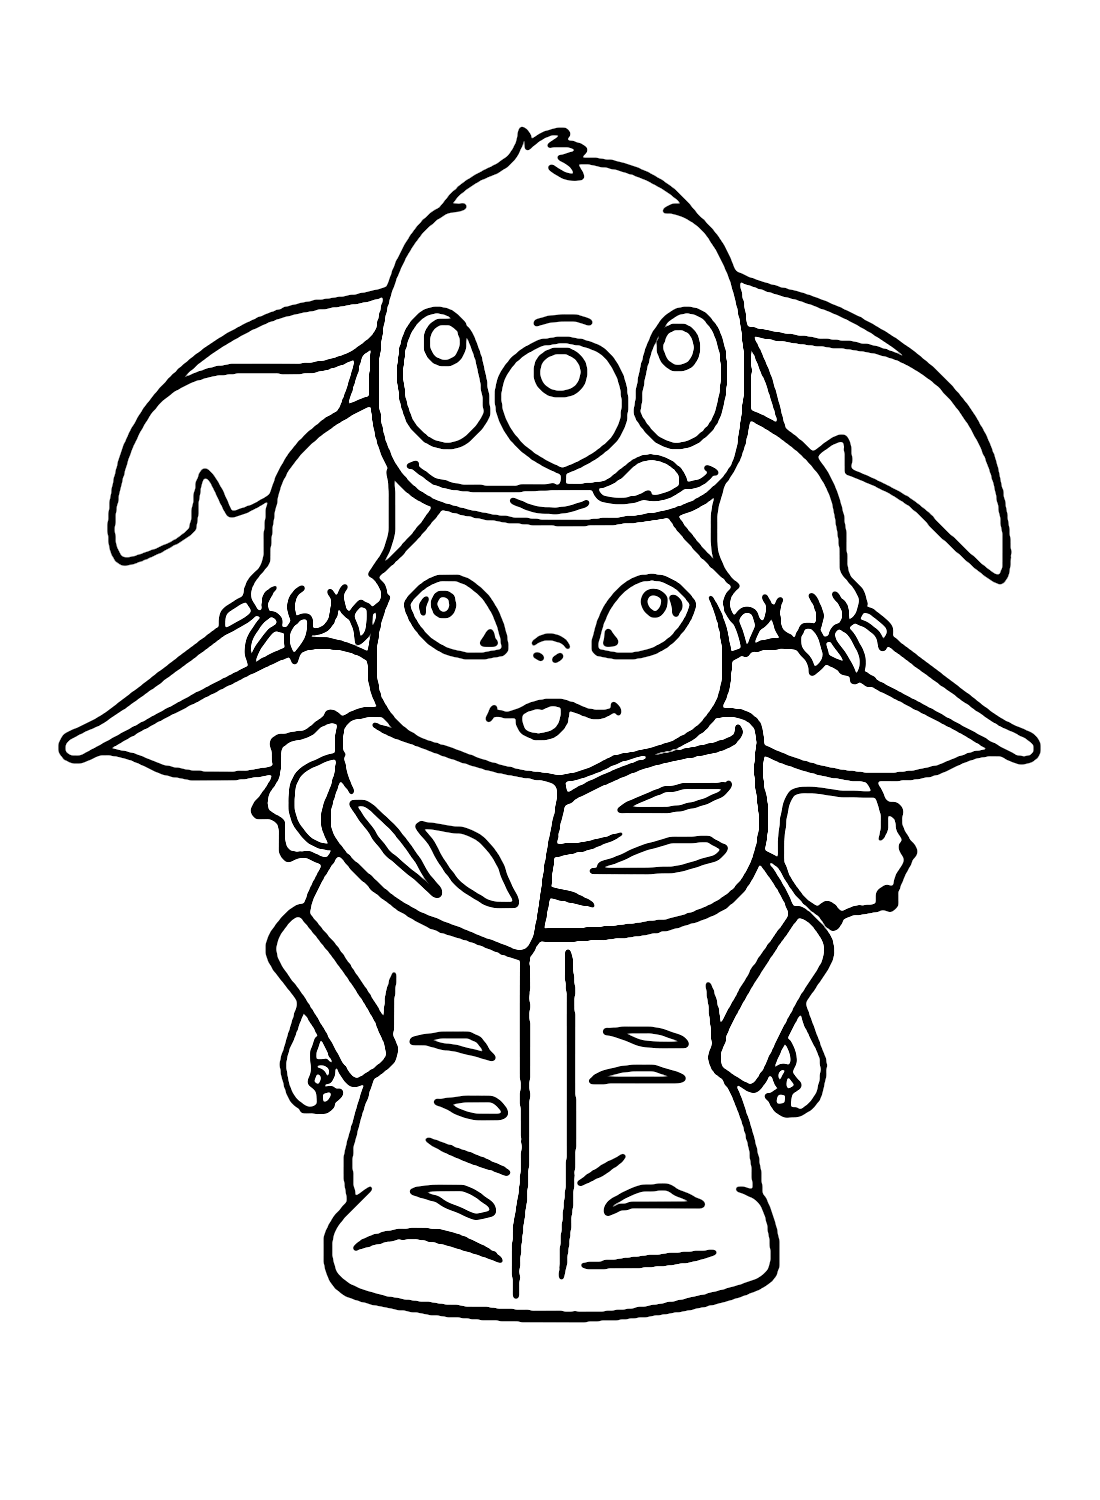 Stitch and Baby Yoda Coloring Pages Coloring Page